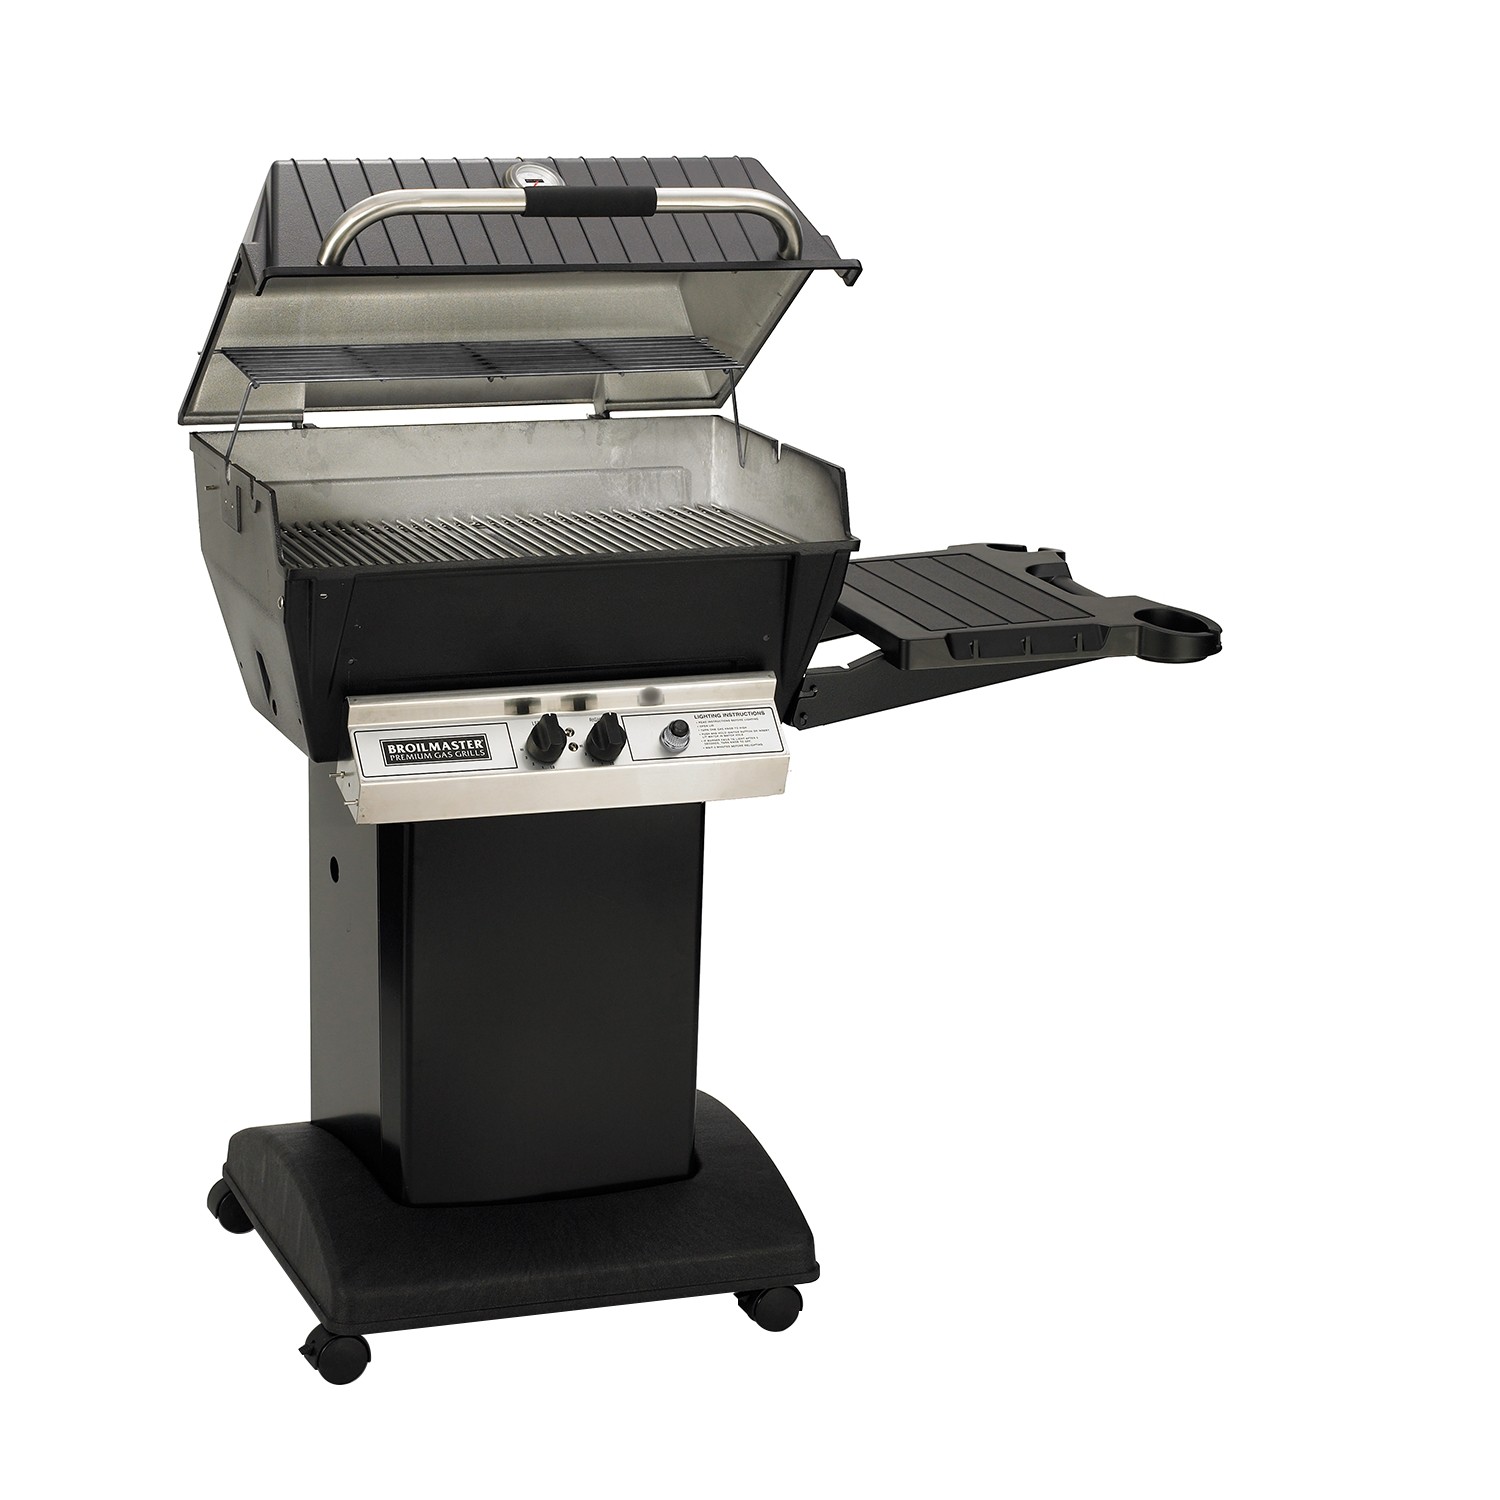 BROILMASTER H3XN DELUXE SERIES NATURAL GAS GRILL - BLACK